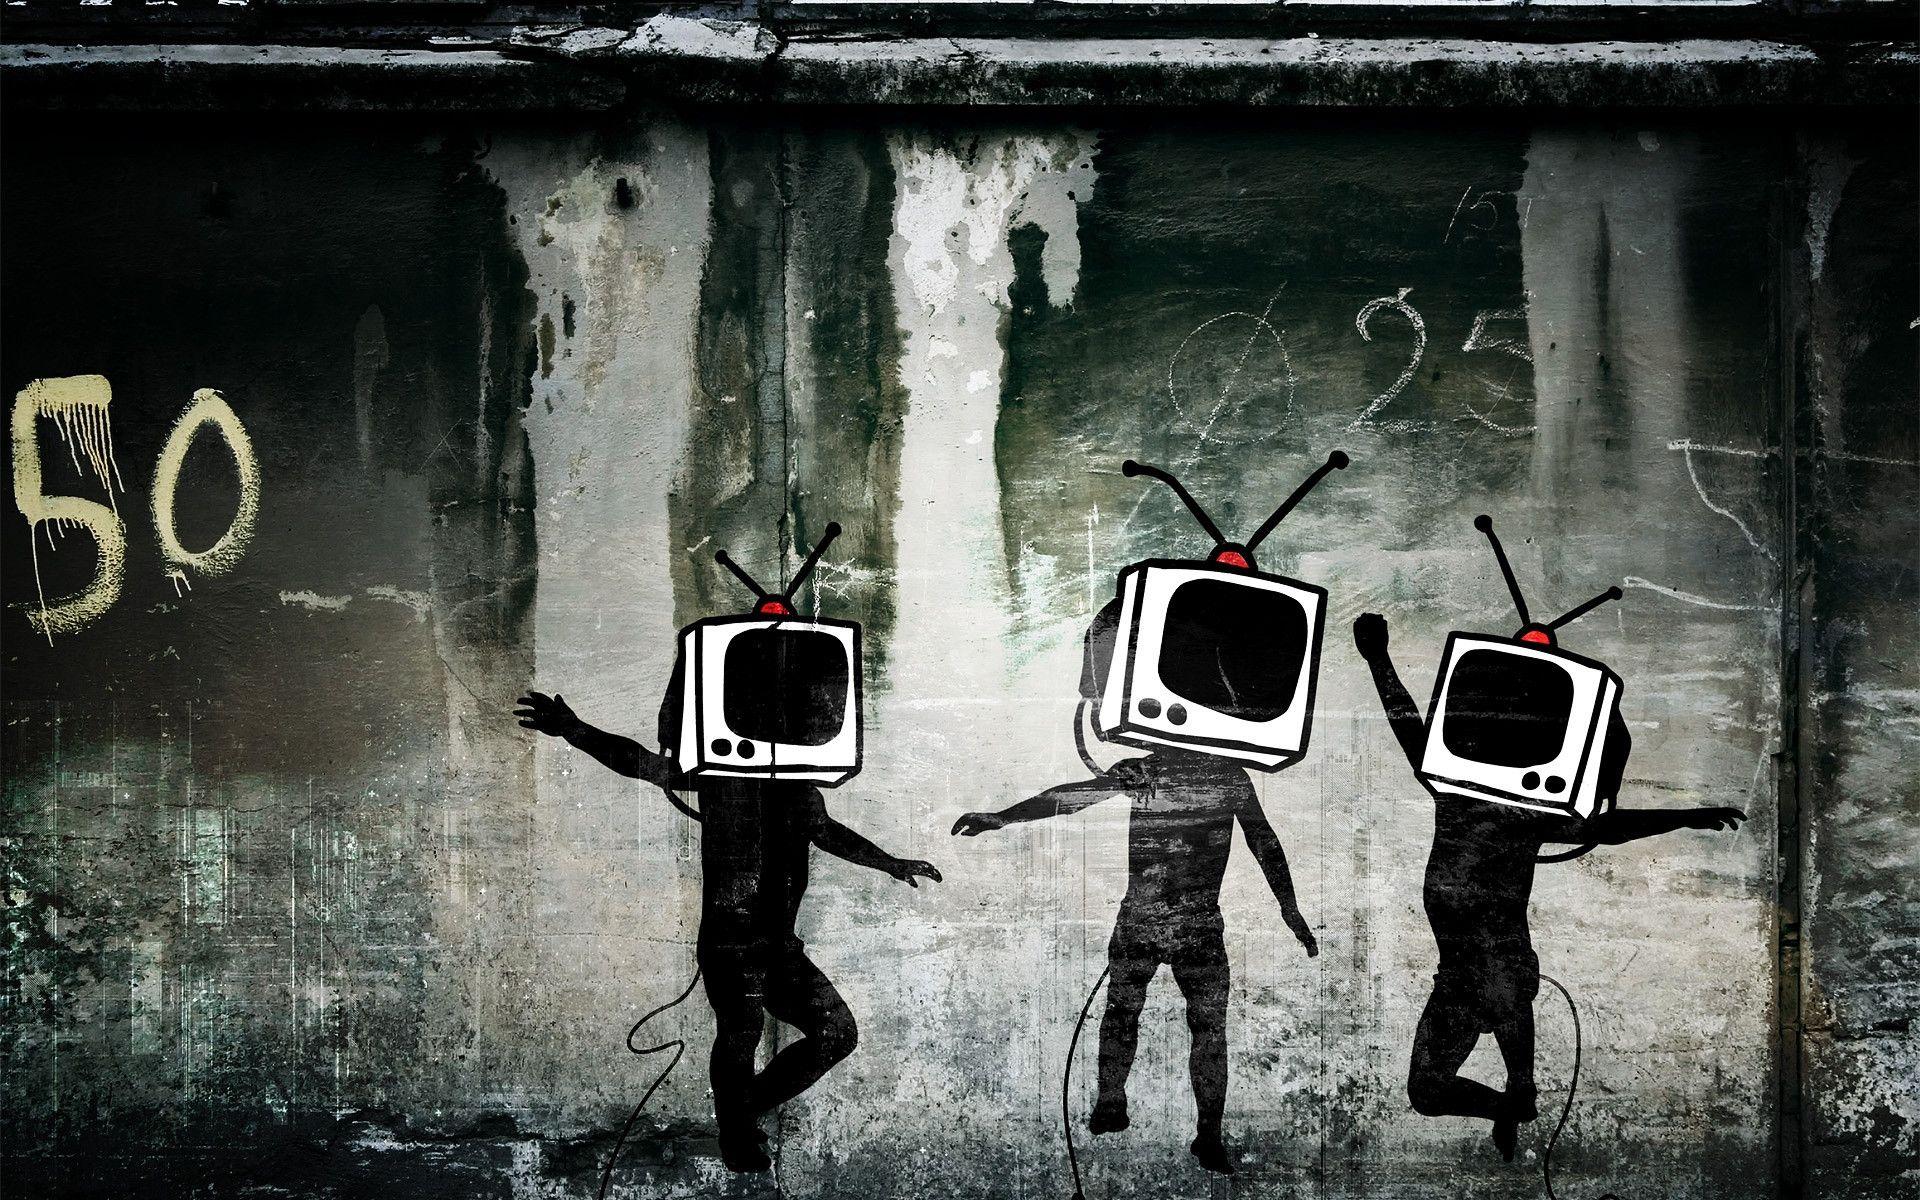 Graffiti of three people with television sets for heads dancing in front of a wall. - Street art, graffiti